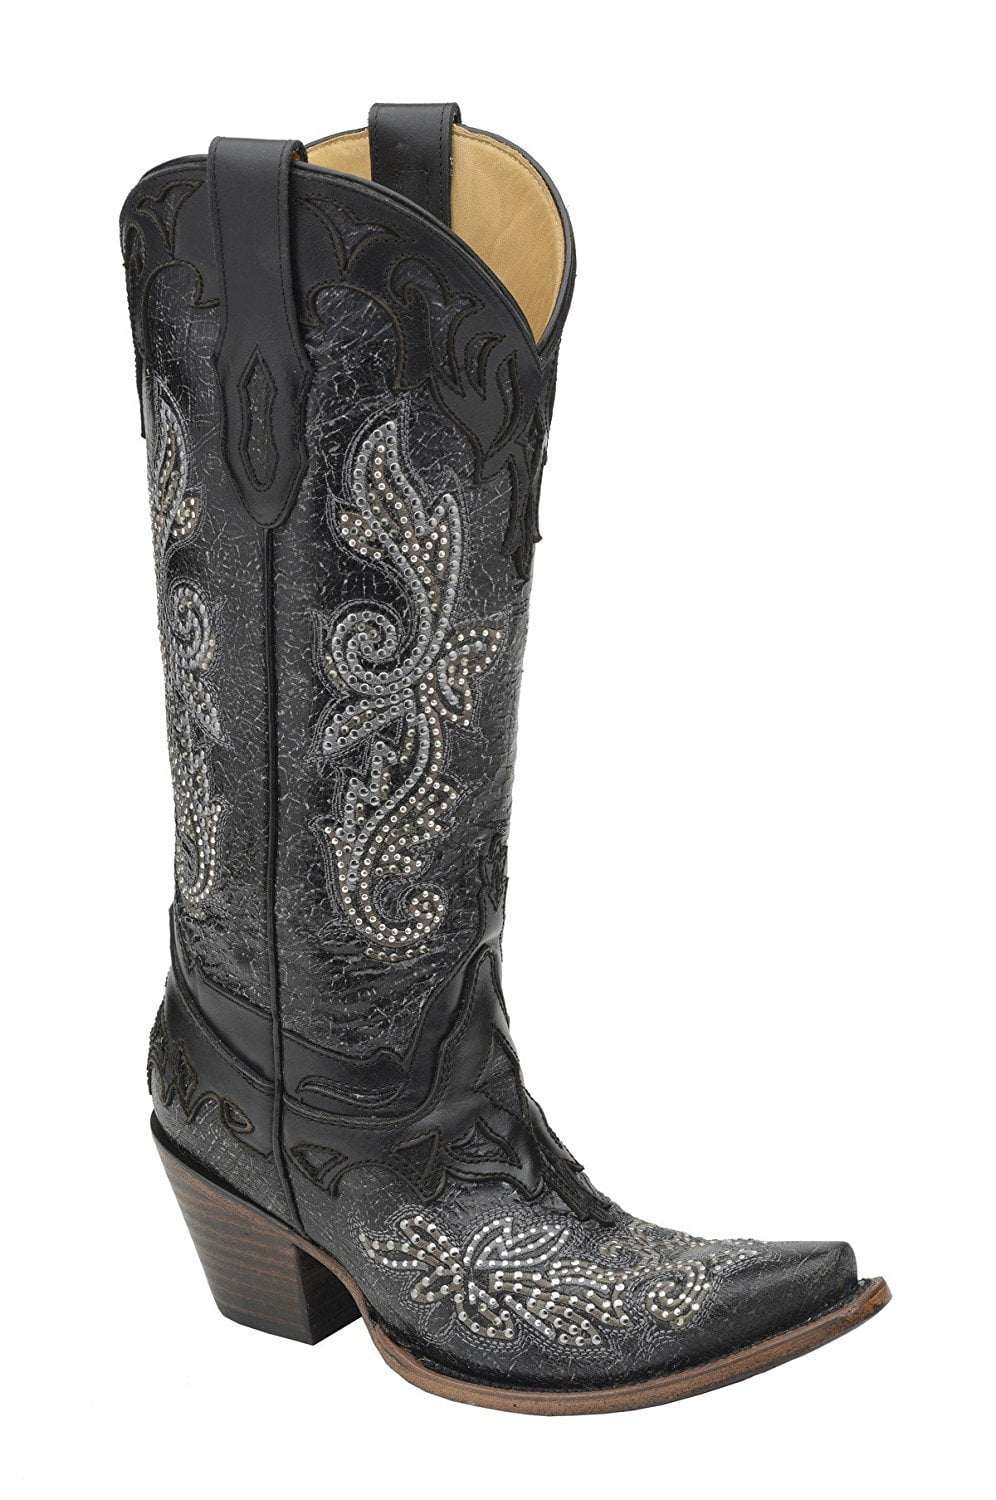 CORRAL Women's Black Cowhide Studded Crystal Snip Toe Cowgirl Boots ...